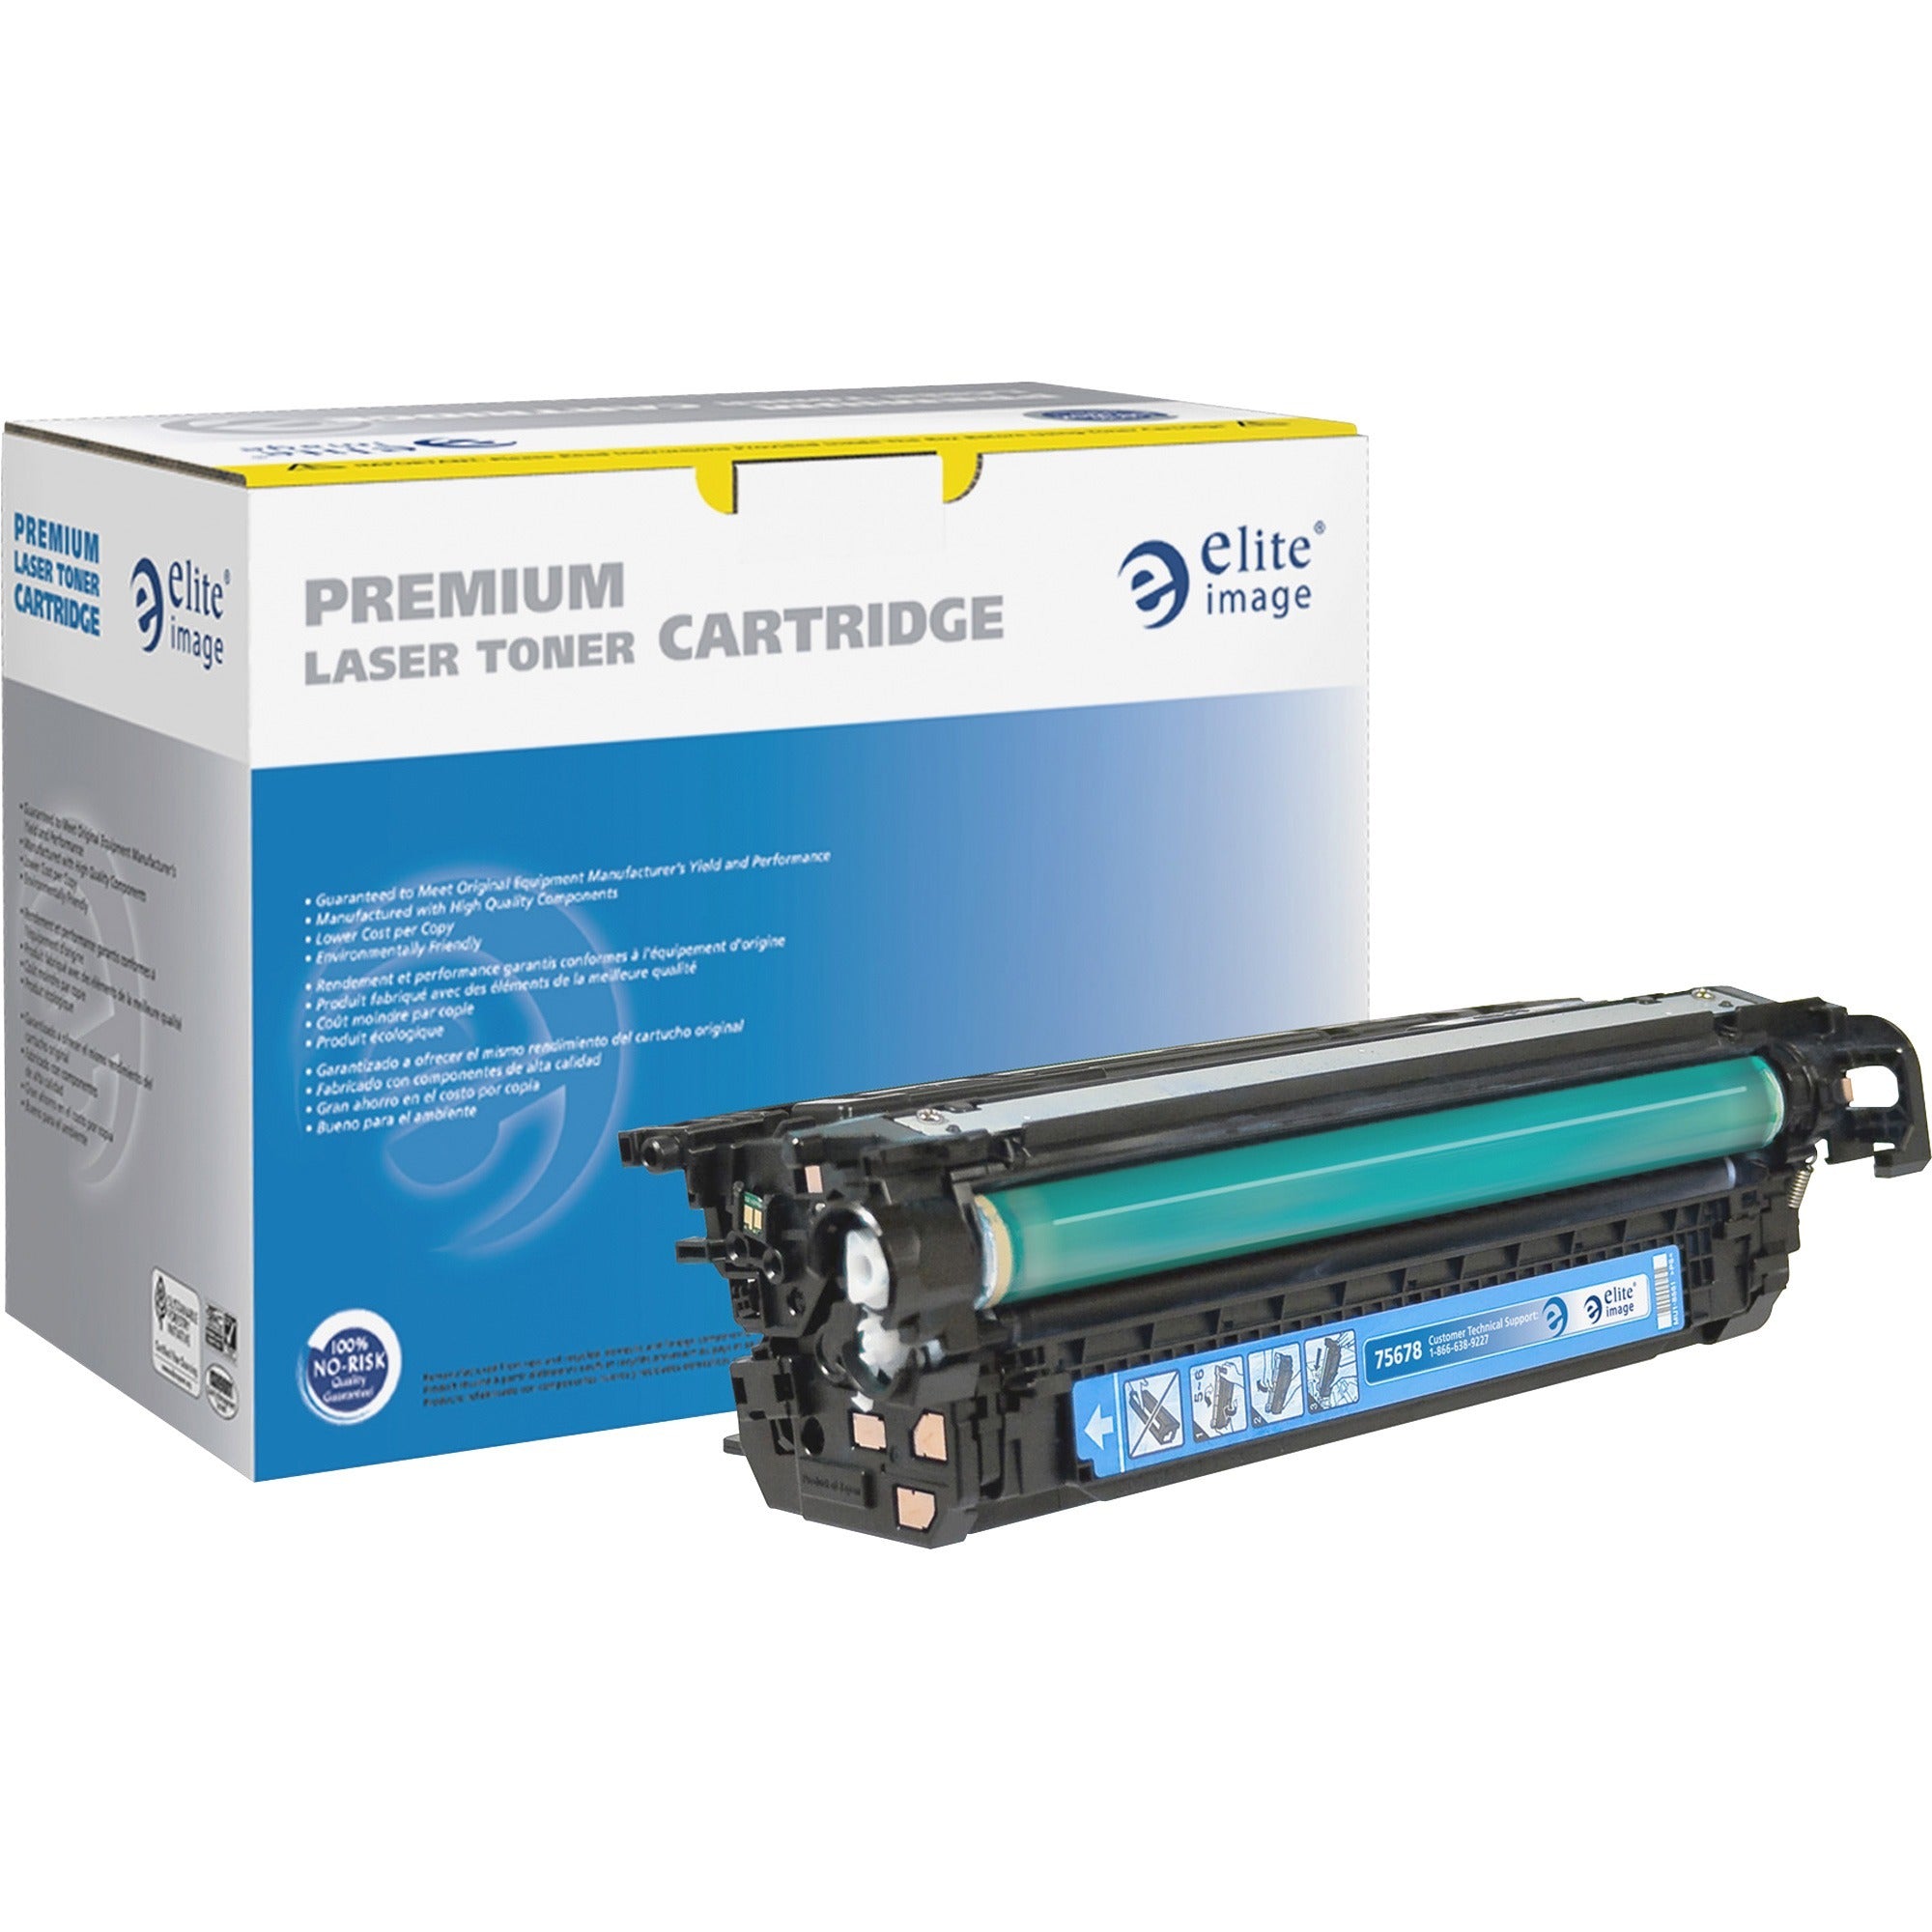 Elite Image Remanufactured Toner Cartridge - Alternative for HP 648A (CE261A) - Laser - 11000 Pages - Cyan - 1 Each - 1